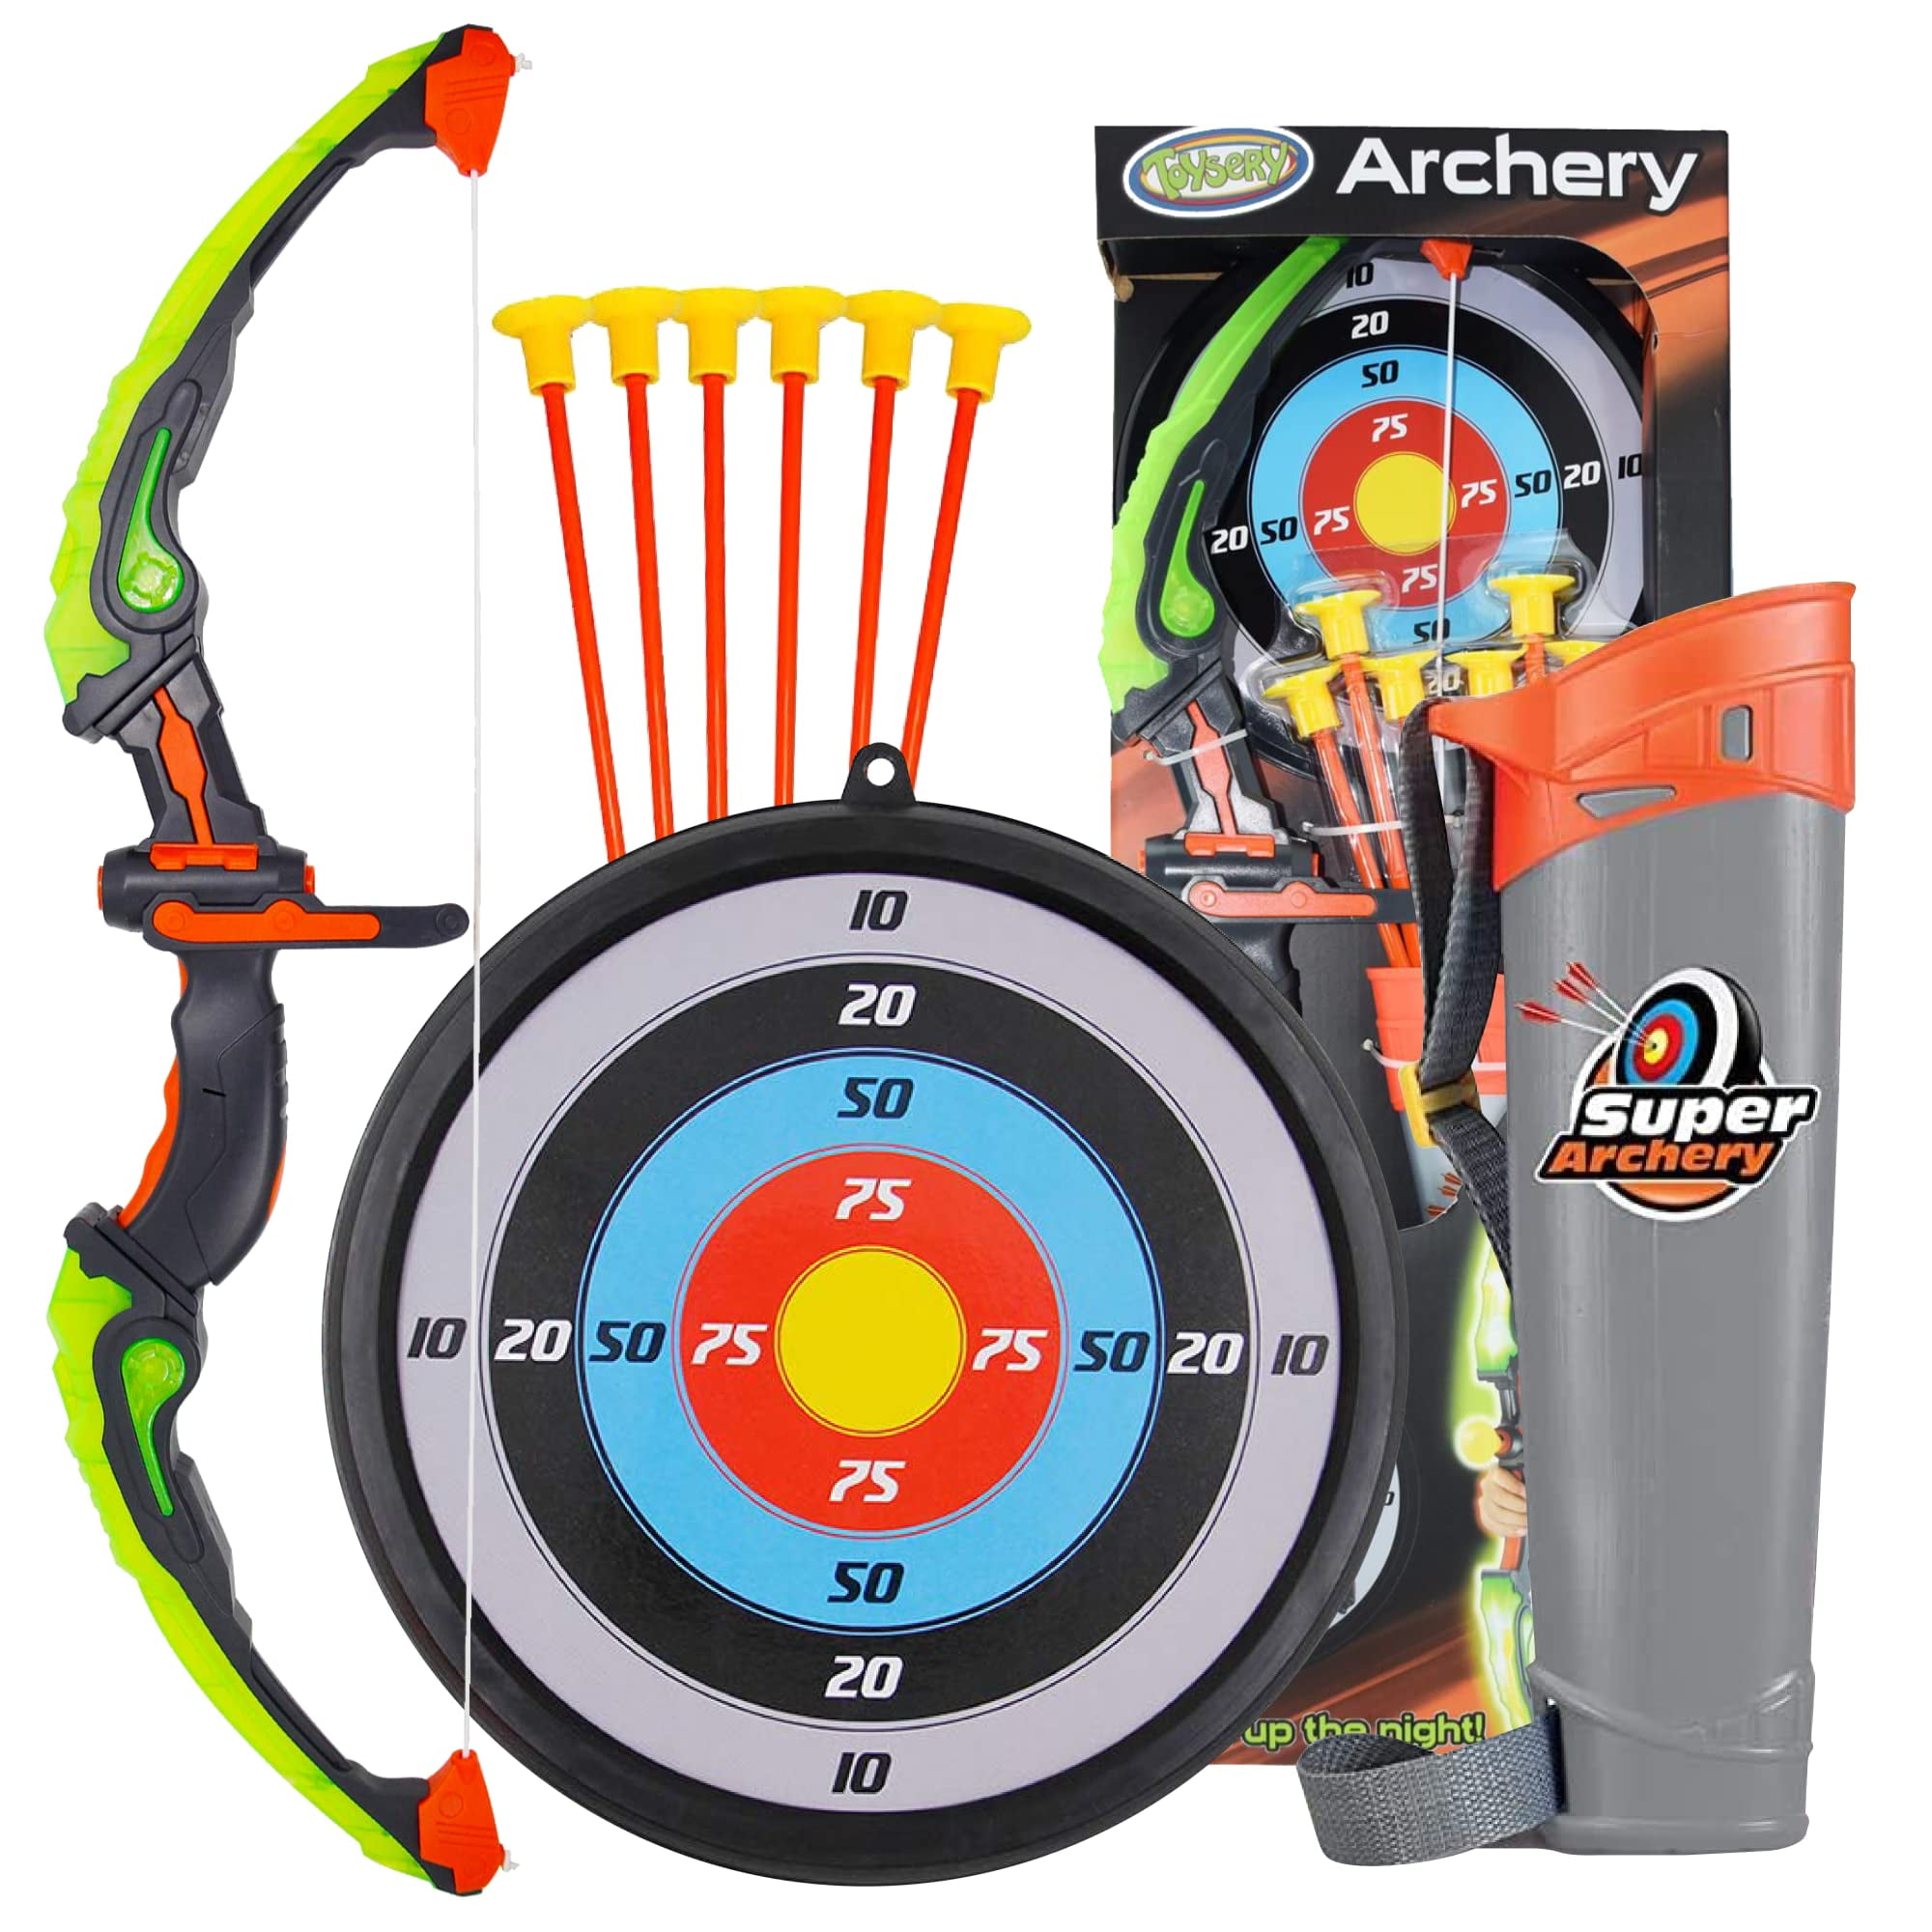 KIDS TOY BOW & ARROW ARCHERY SET AND TARGET OUTDOOR GARDEN FUN GAME FAMILY NEW 